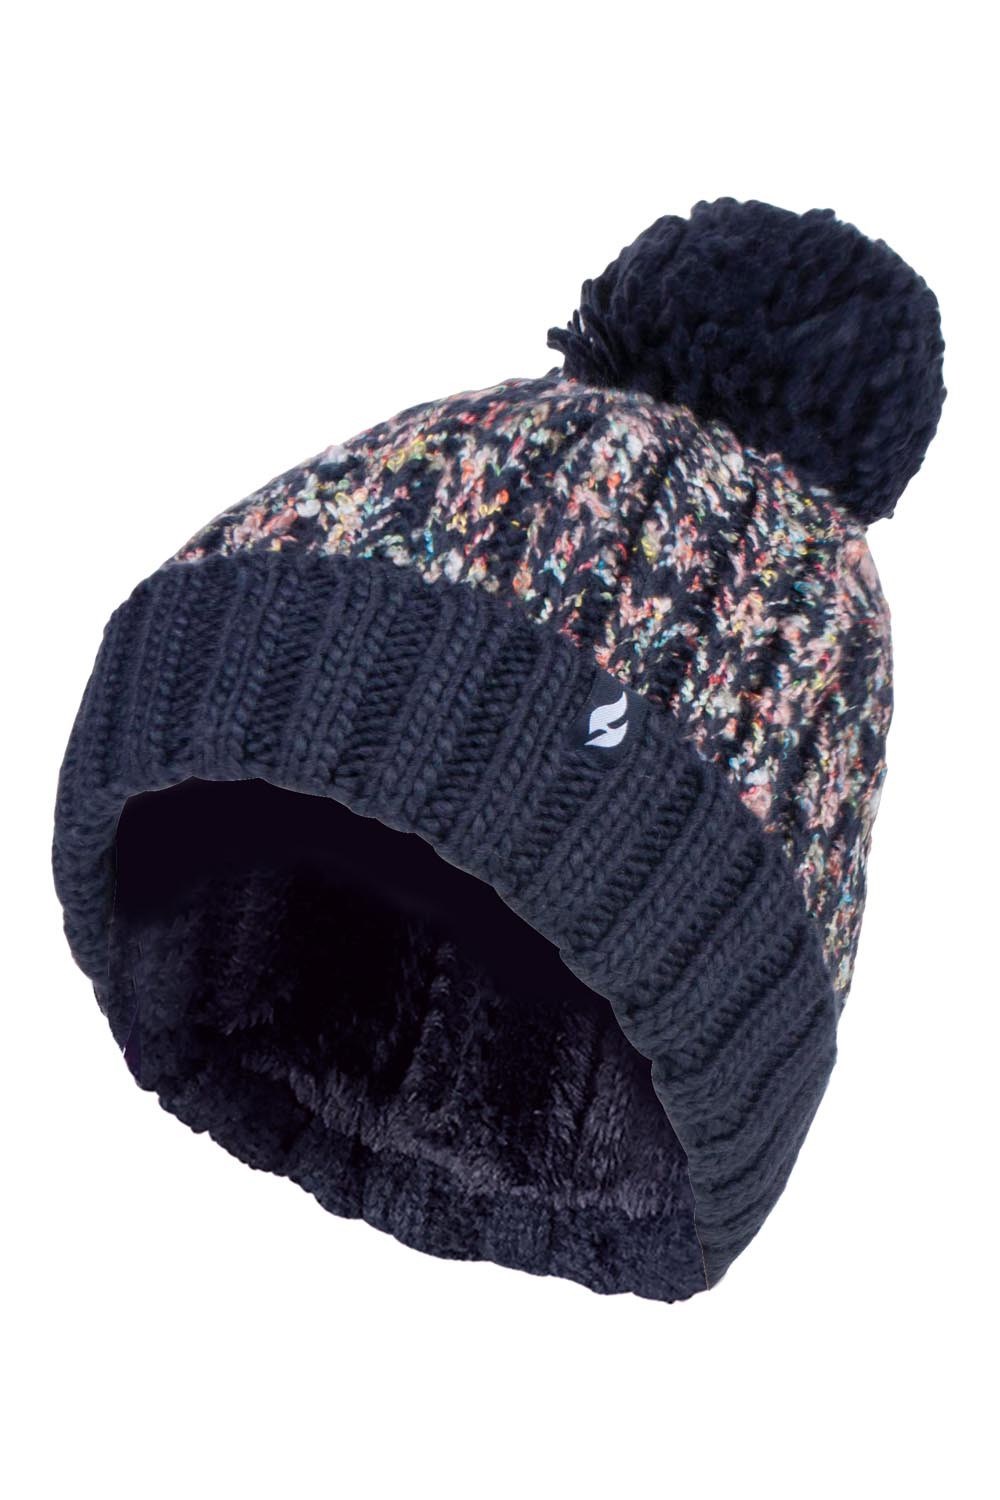 Womens Thermal Winter Bobble Hat -